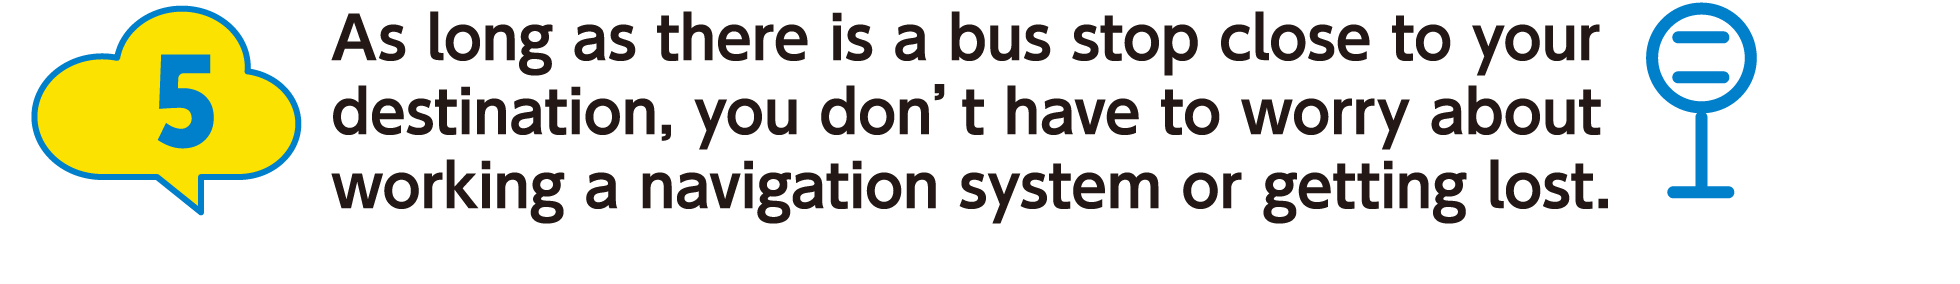 5:As long as there is a bus stop close to your destination, you don’t have to worry about working a navigation system or getting lost.